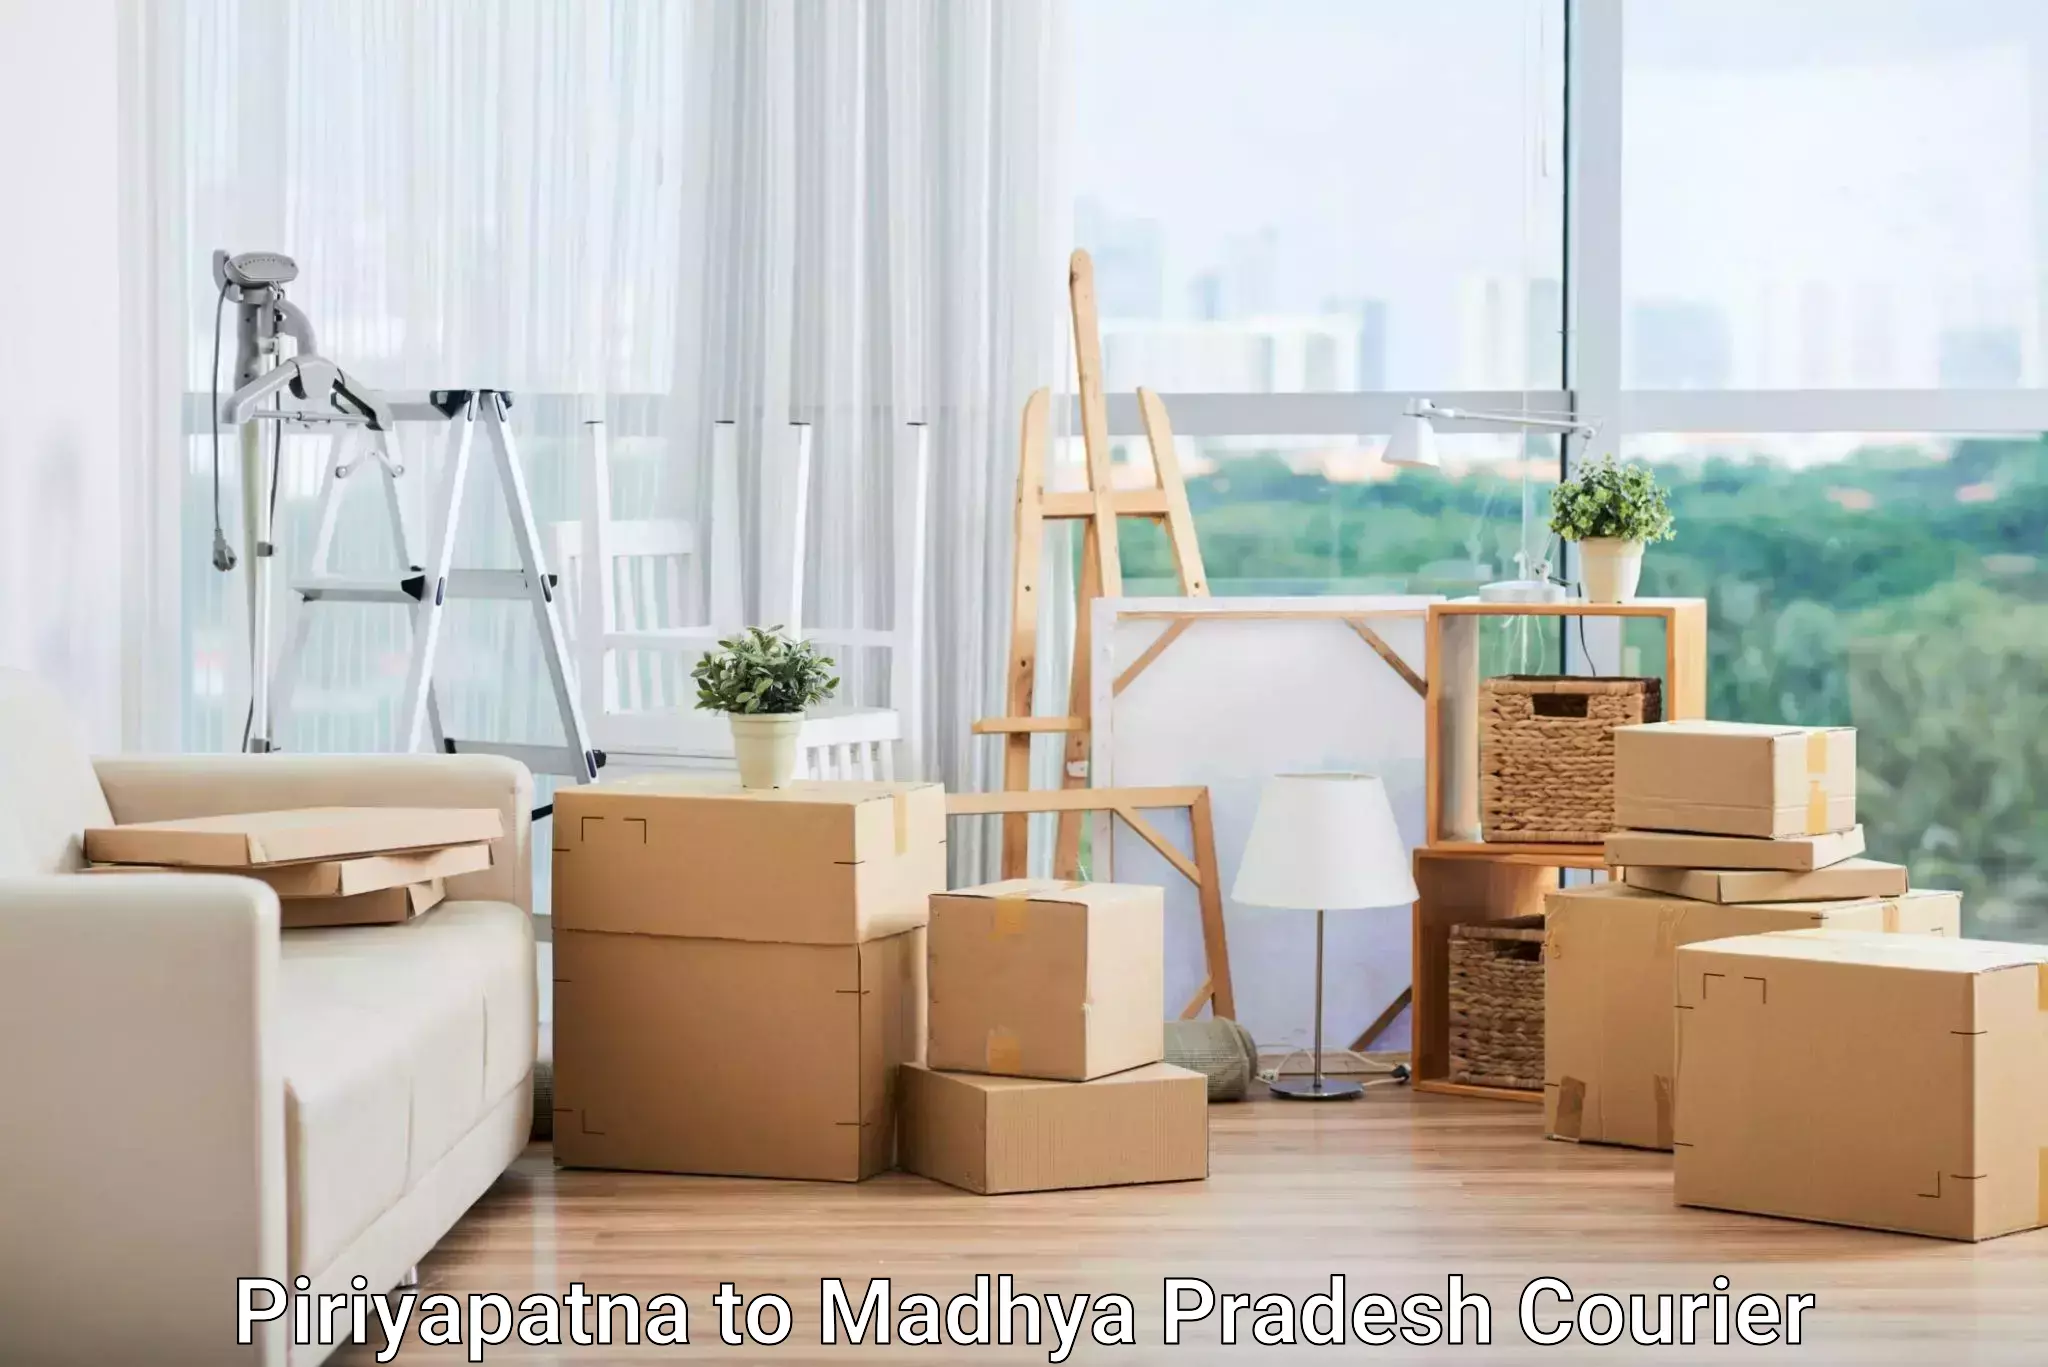 Cost-effective courier solutions Piriyapatna to Dewas